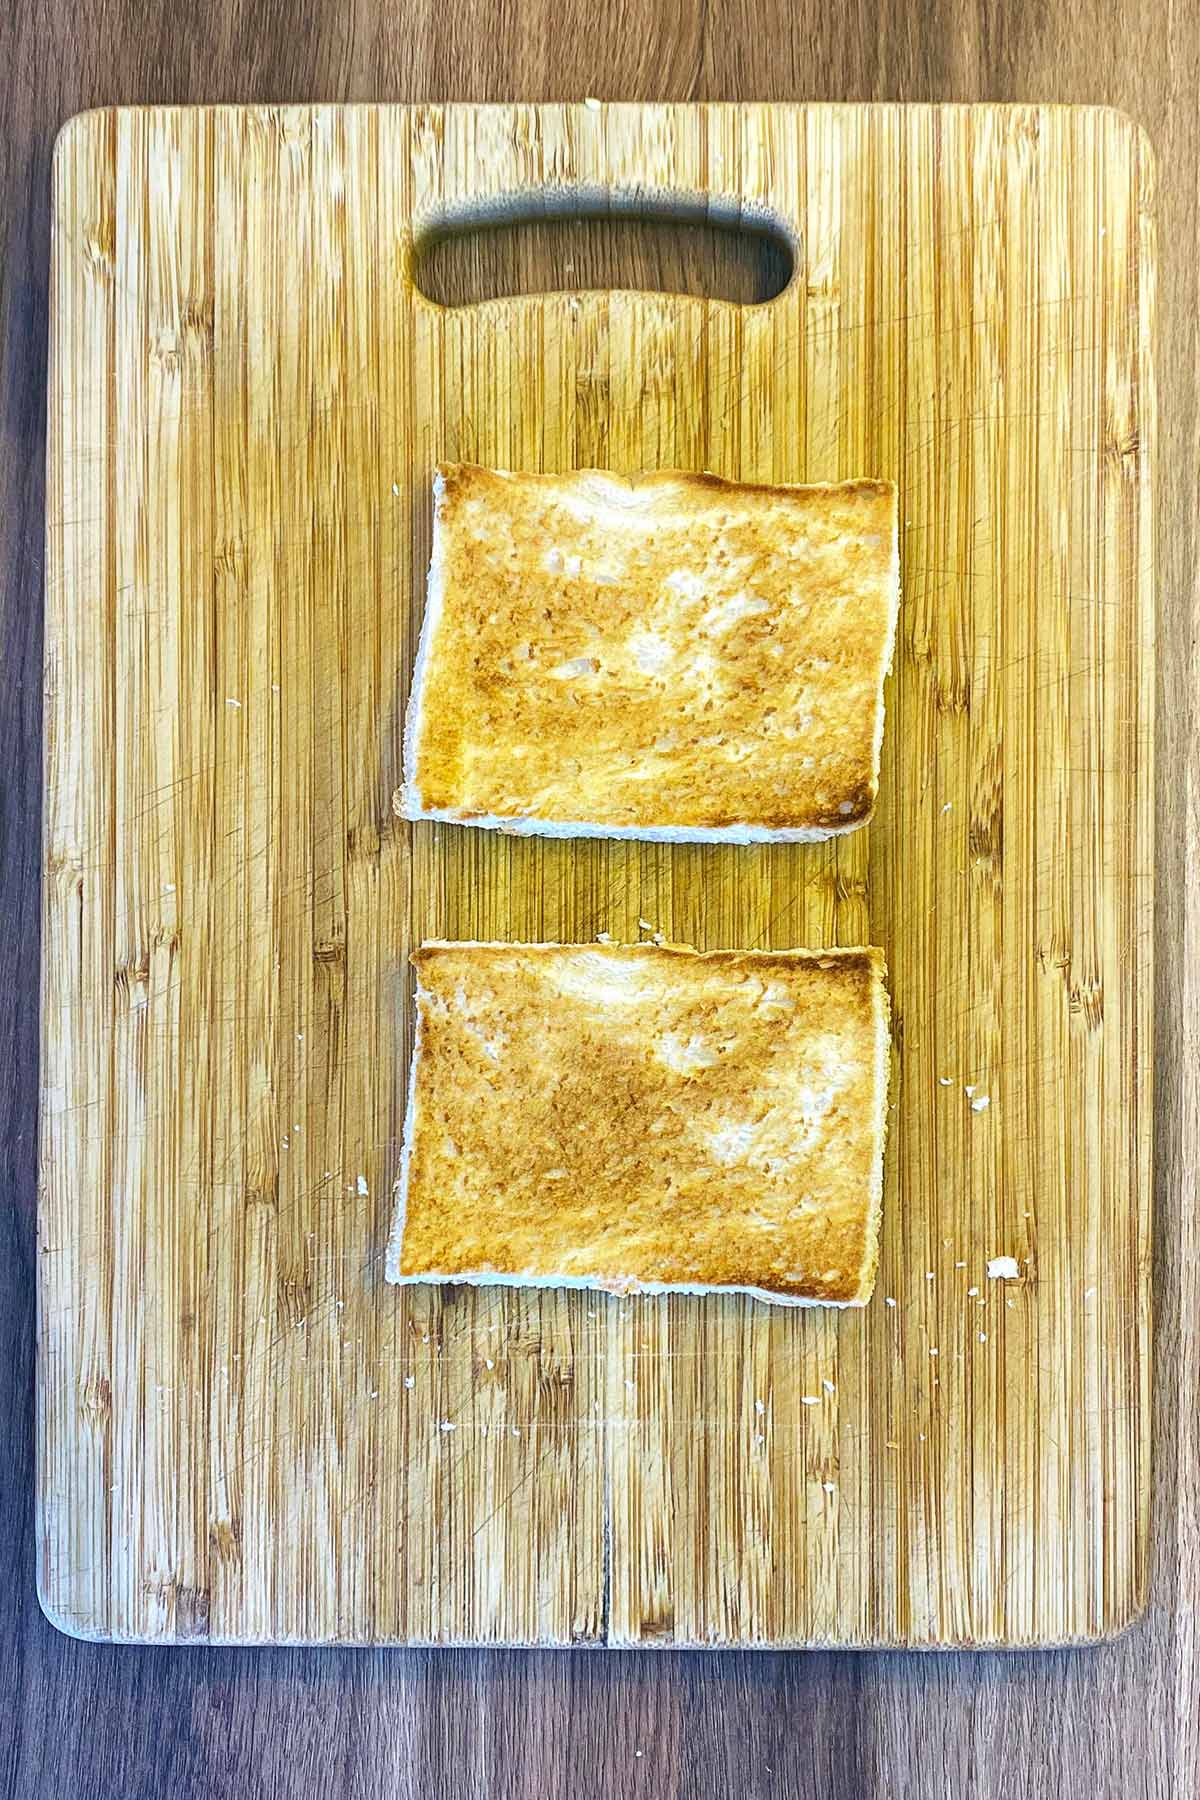 Two slices of toast on a chopping board.